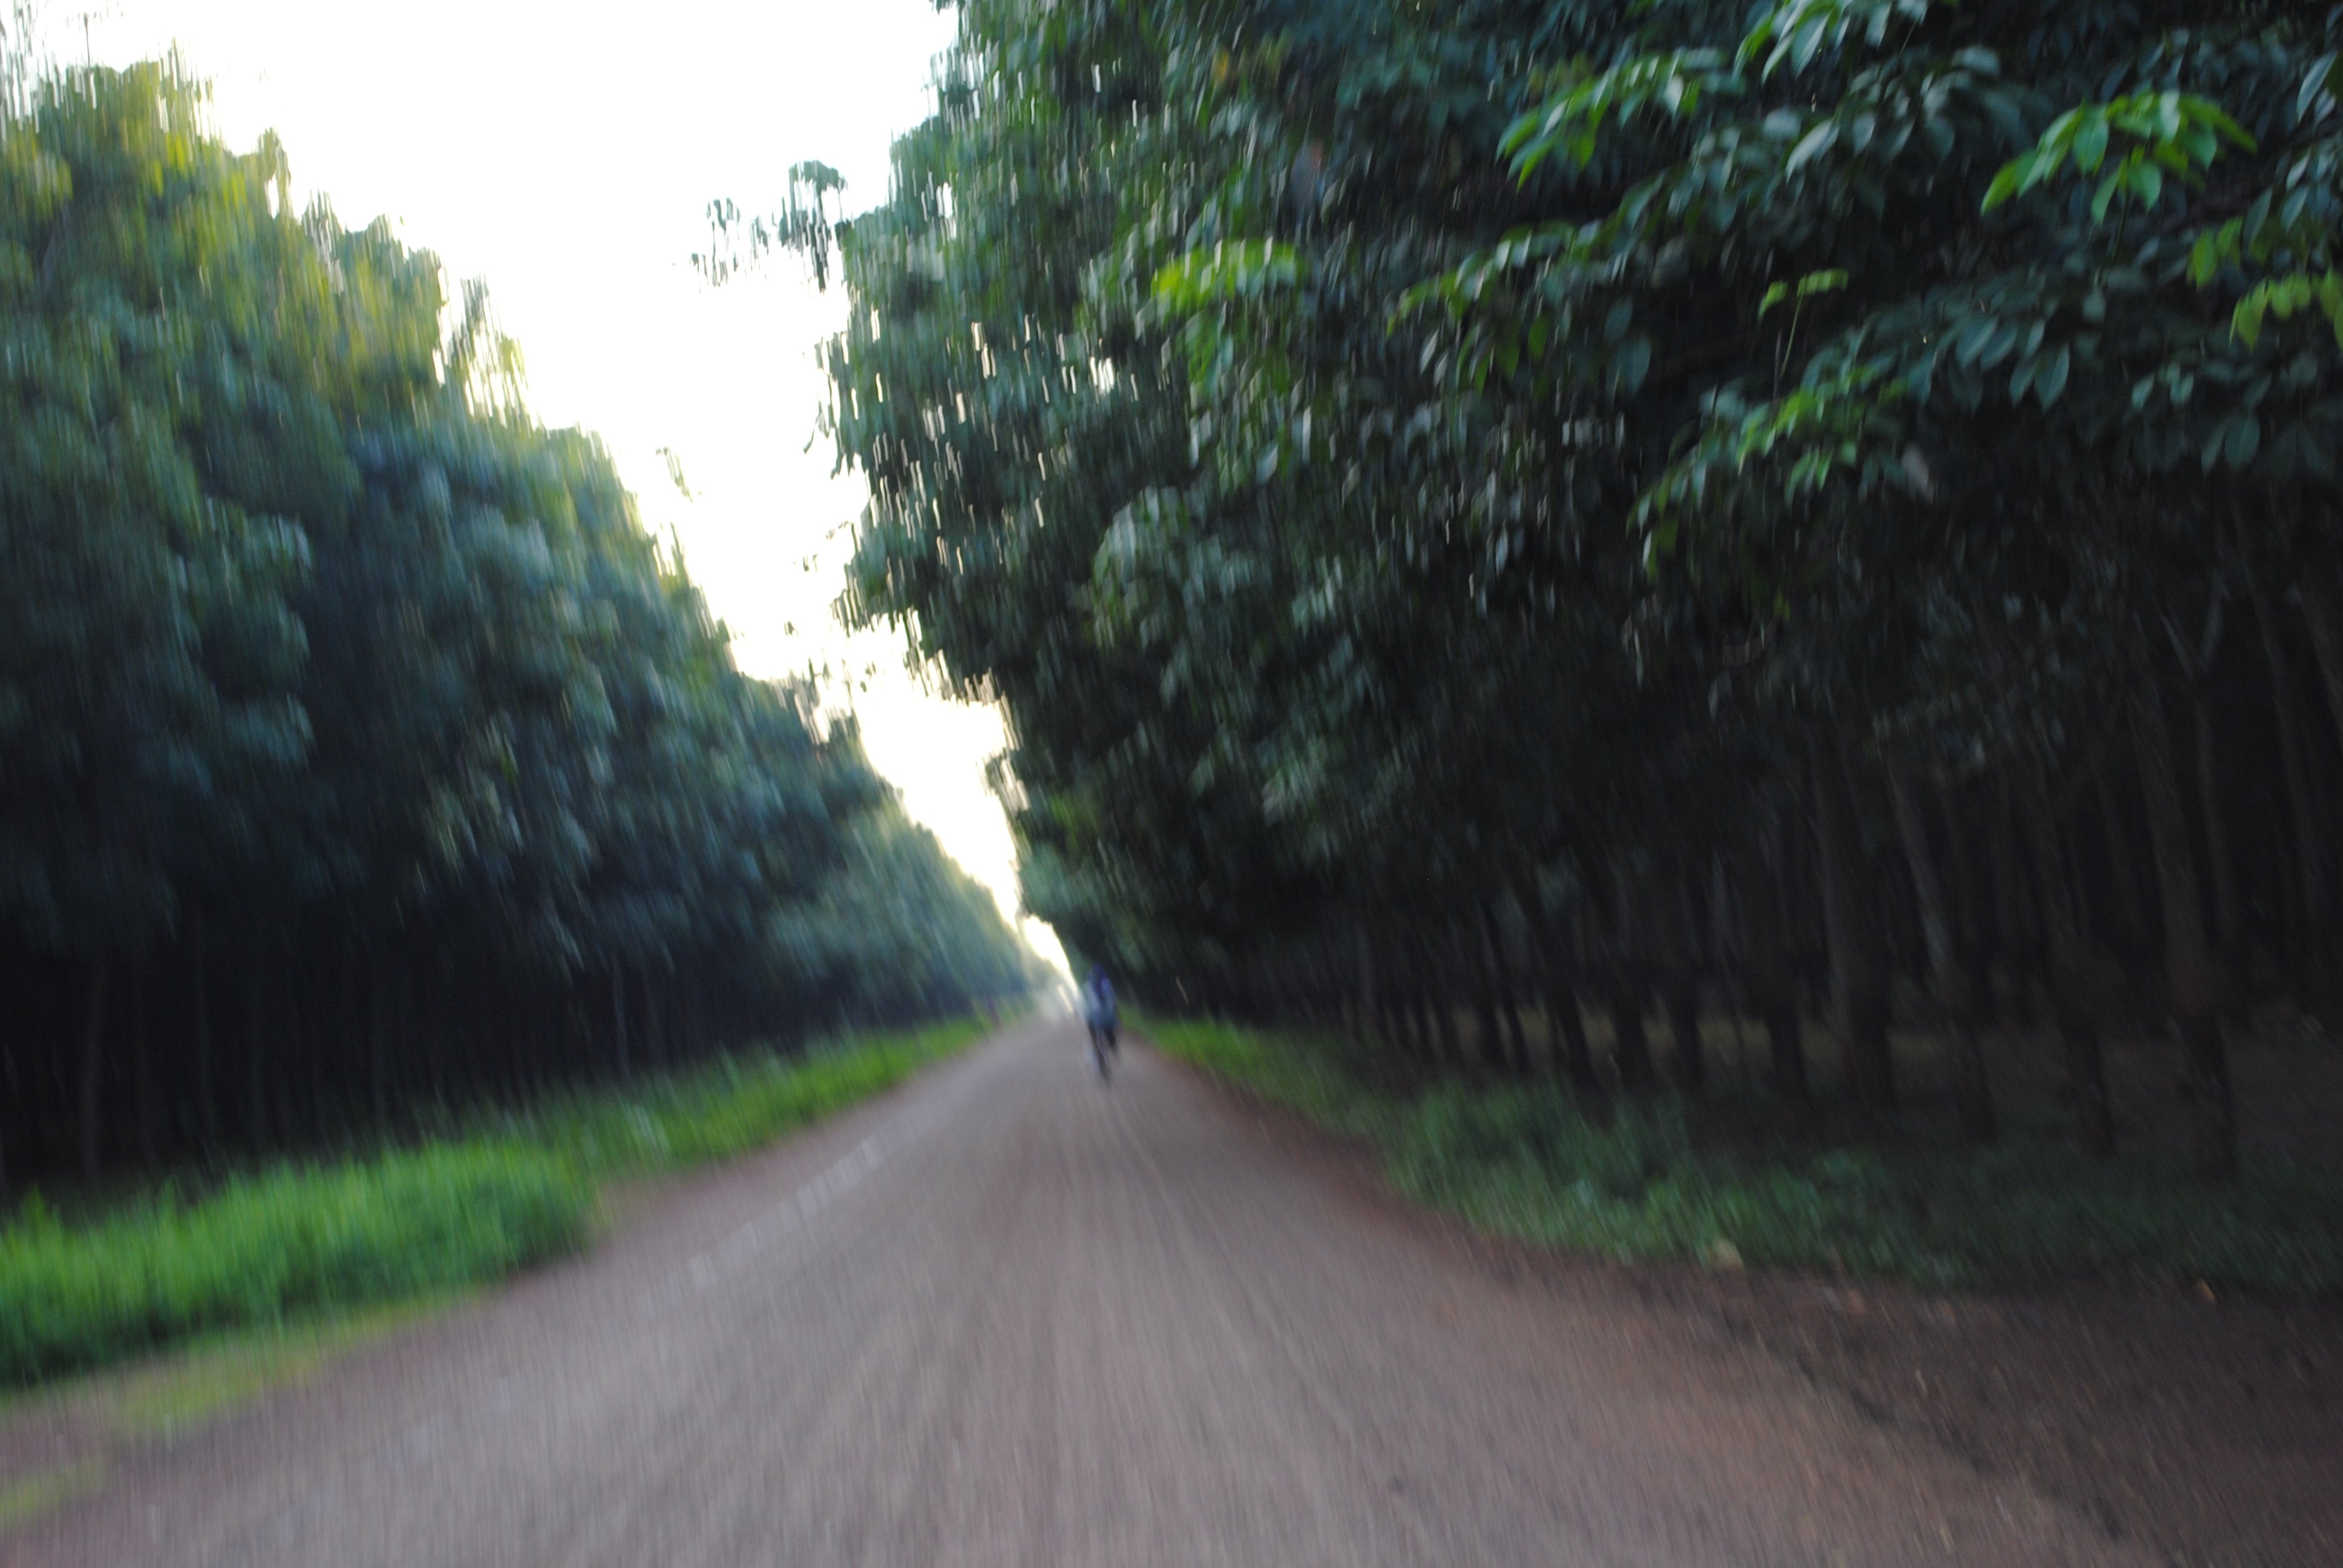 Your life pathway can be blur yet you have to move on to the direction you are envisioned. (Photo by the author in 2013 at Rubber Plantation in Kampong Cham Pronvince). (cc-2013, Sopheap Chak)